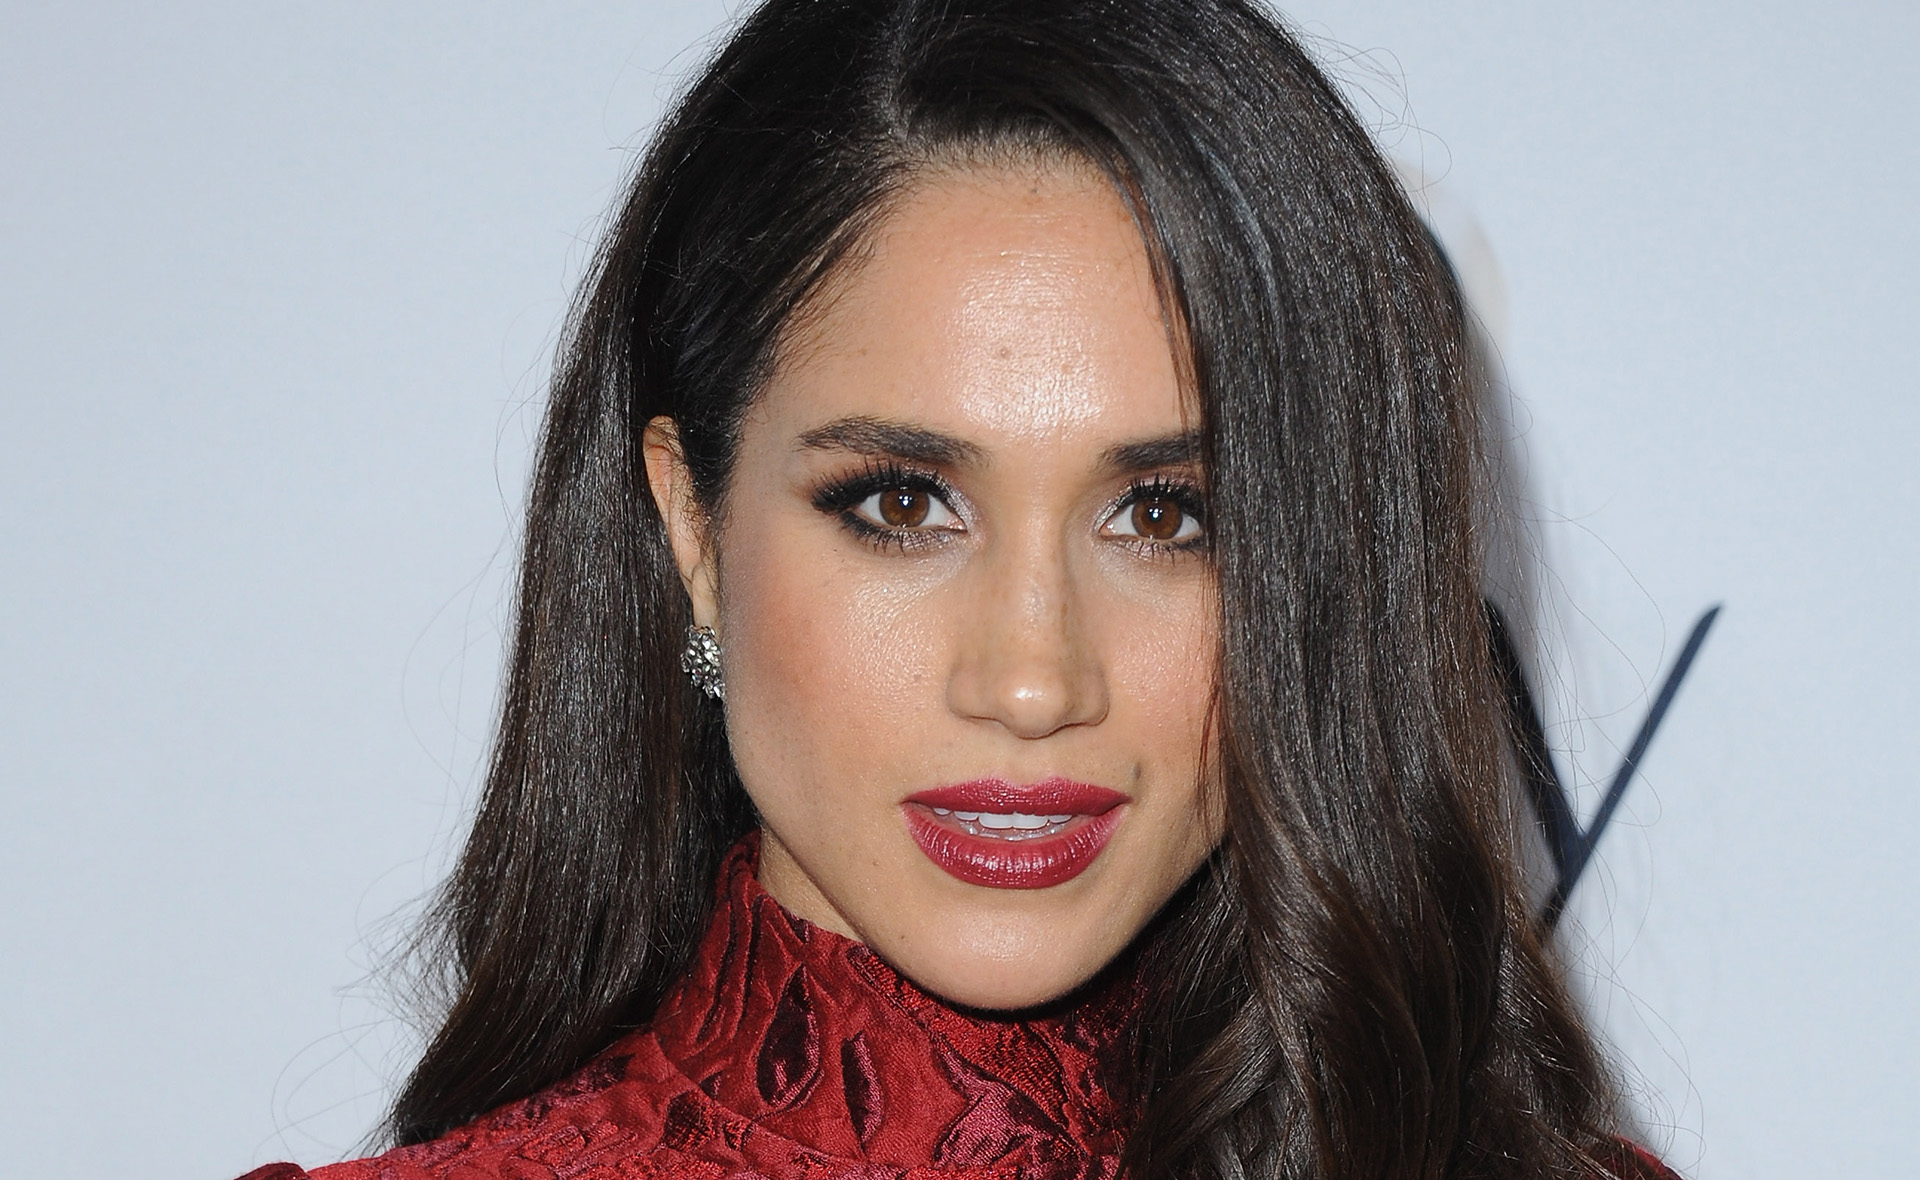 Is Meghan Markle about to launch her own beauty line? Finding the truth in the rumours